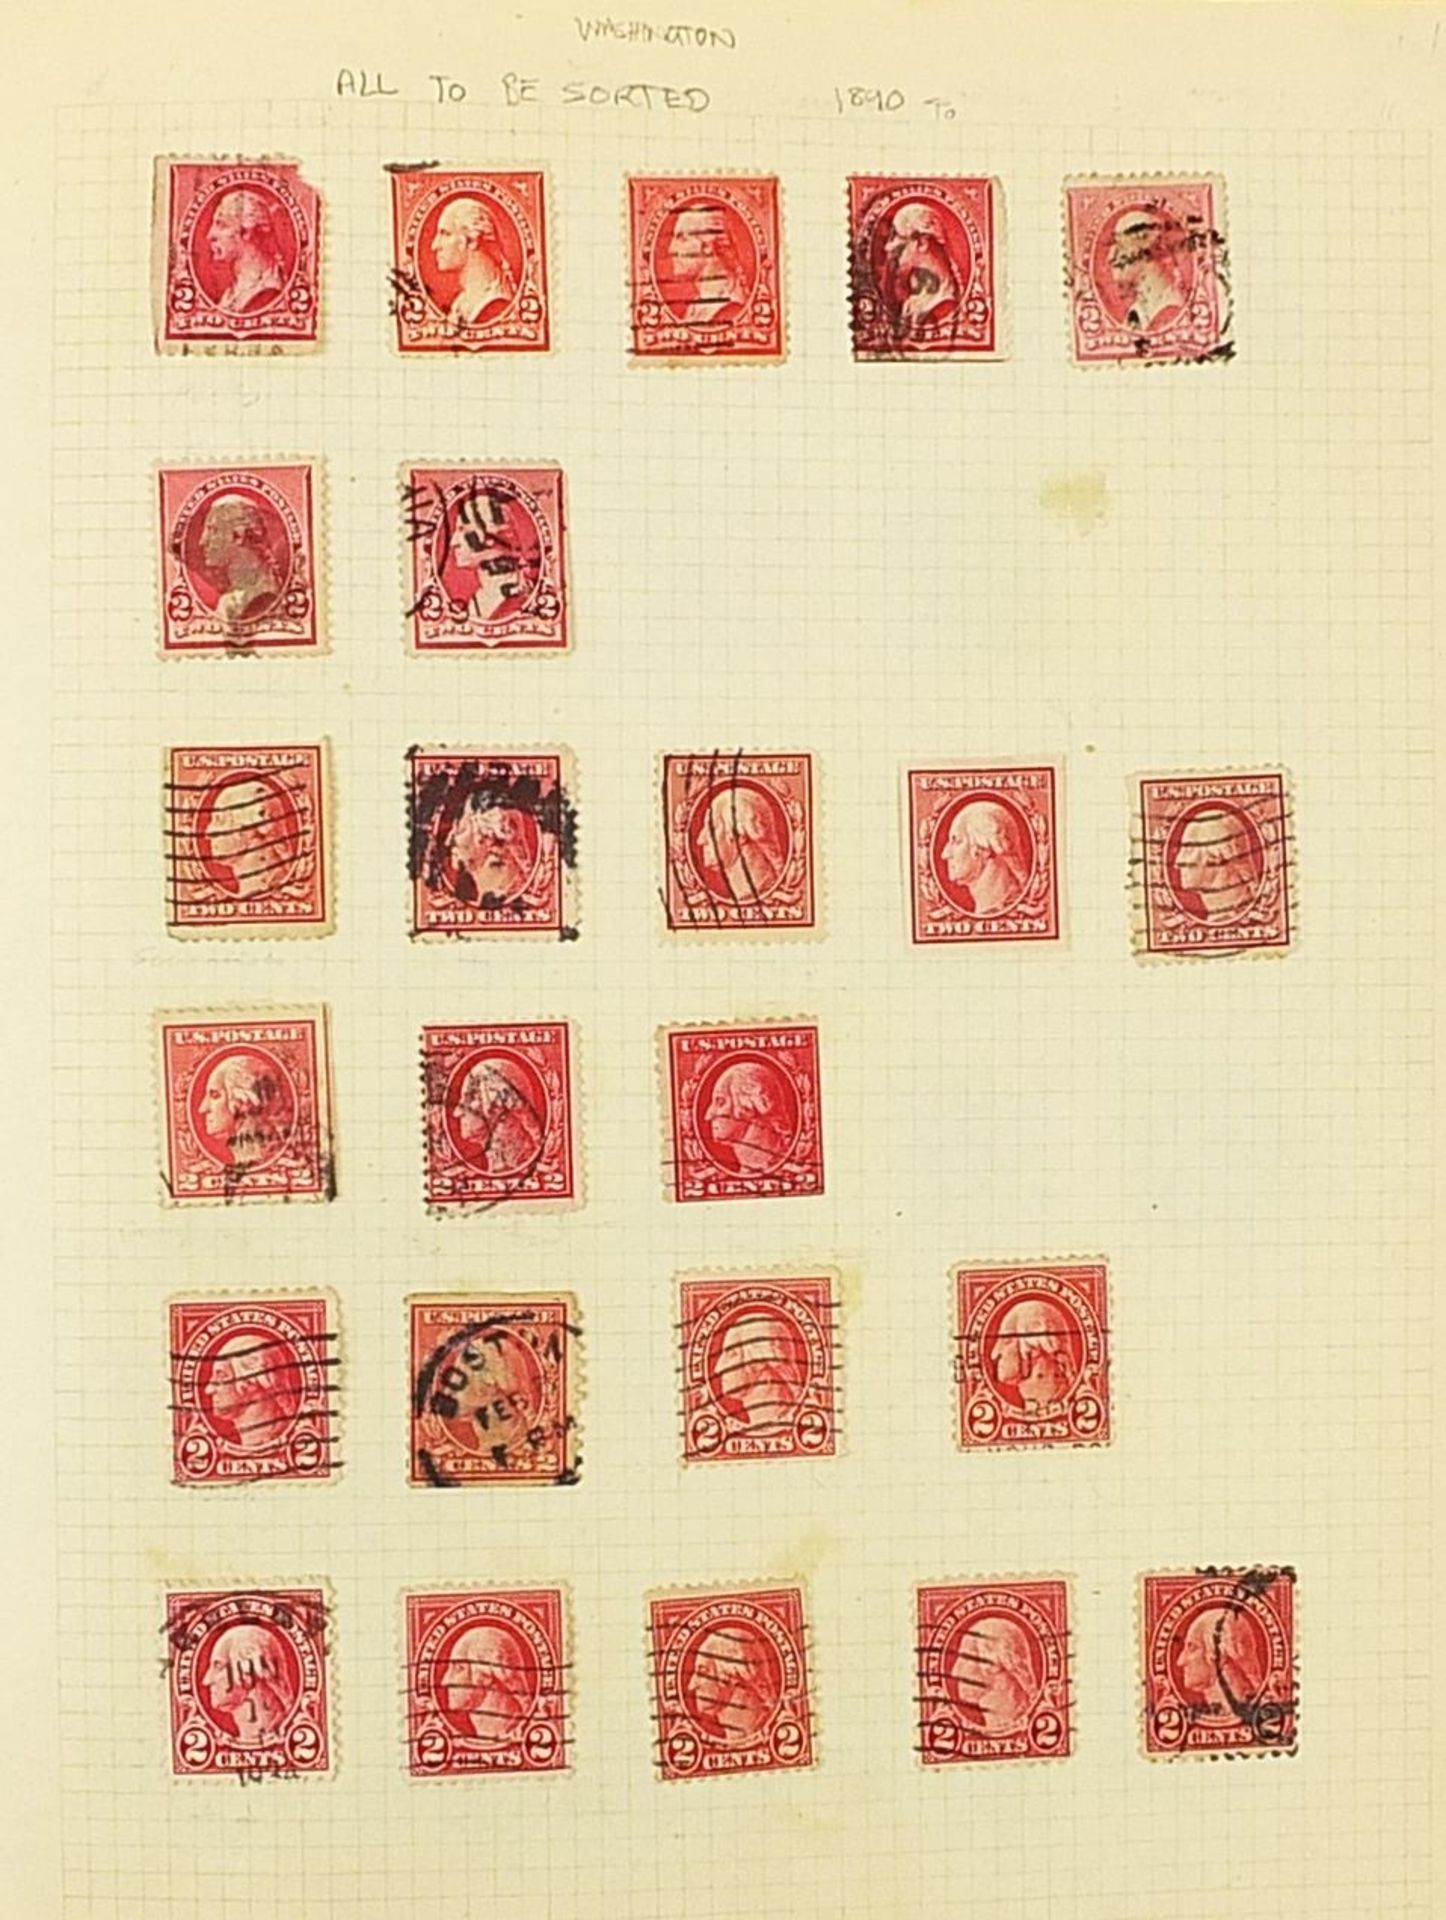 United States of America stamps from the early Presidents to 1950, arranged in an album - Image 2 of 6